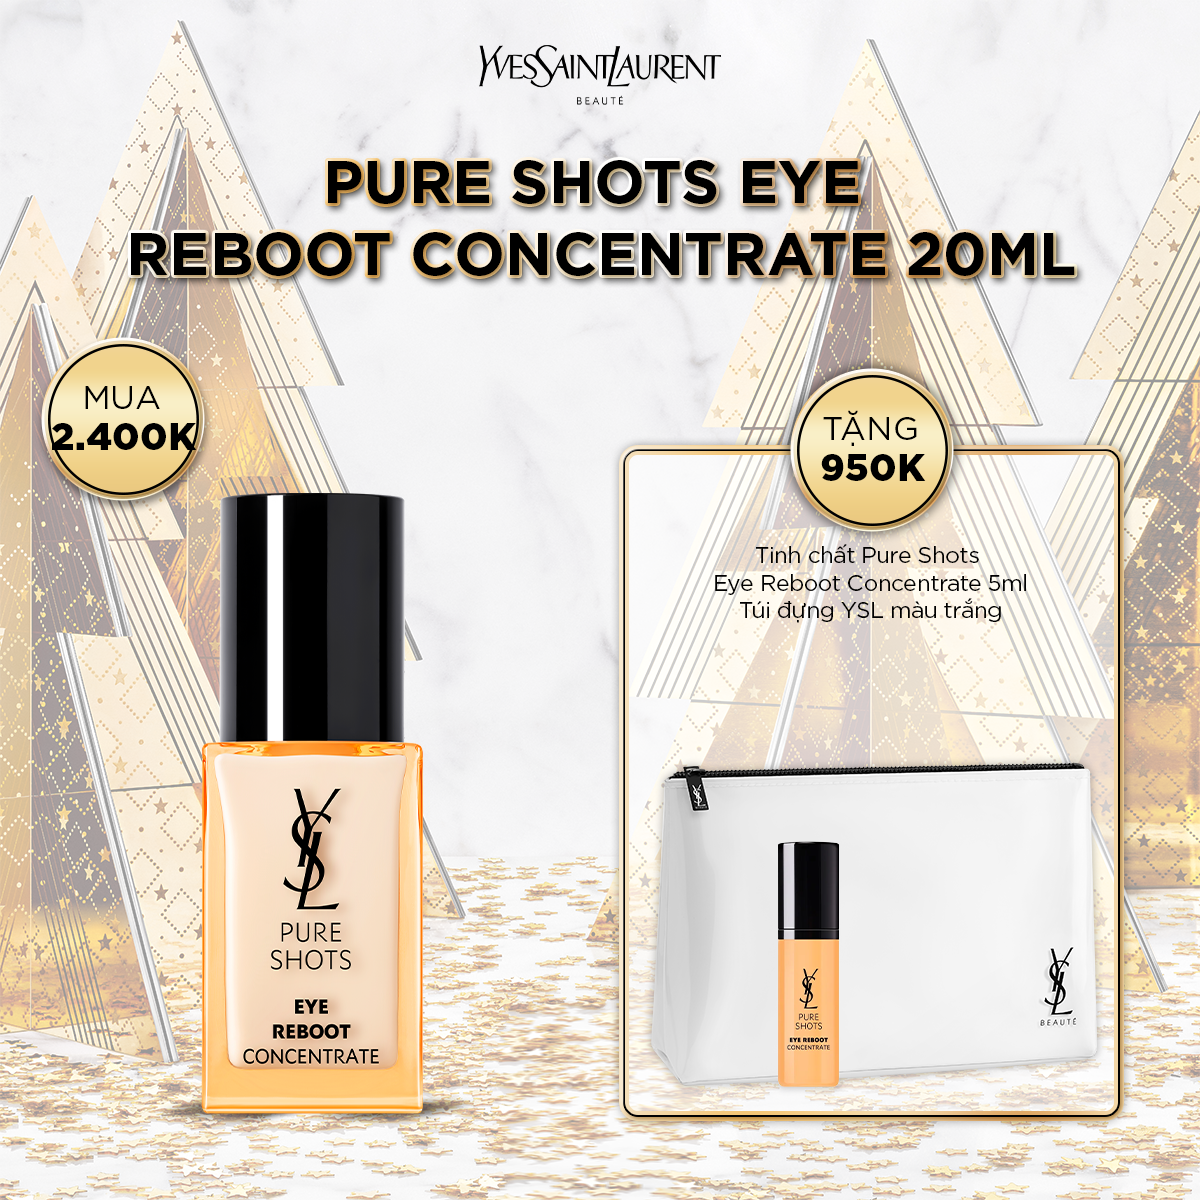 [XMAS] Pure Shots Eye Reboot Concentrate 20ml